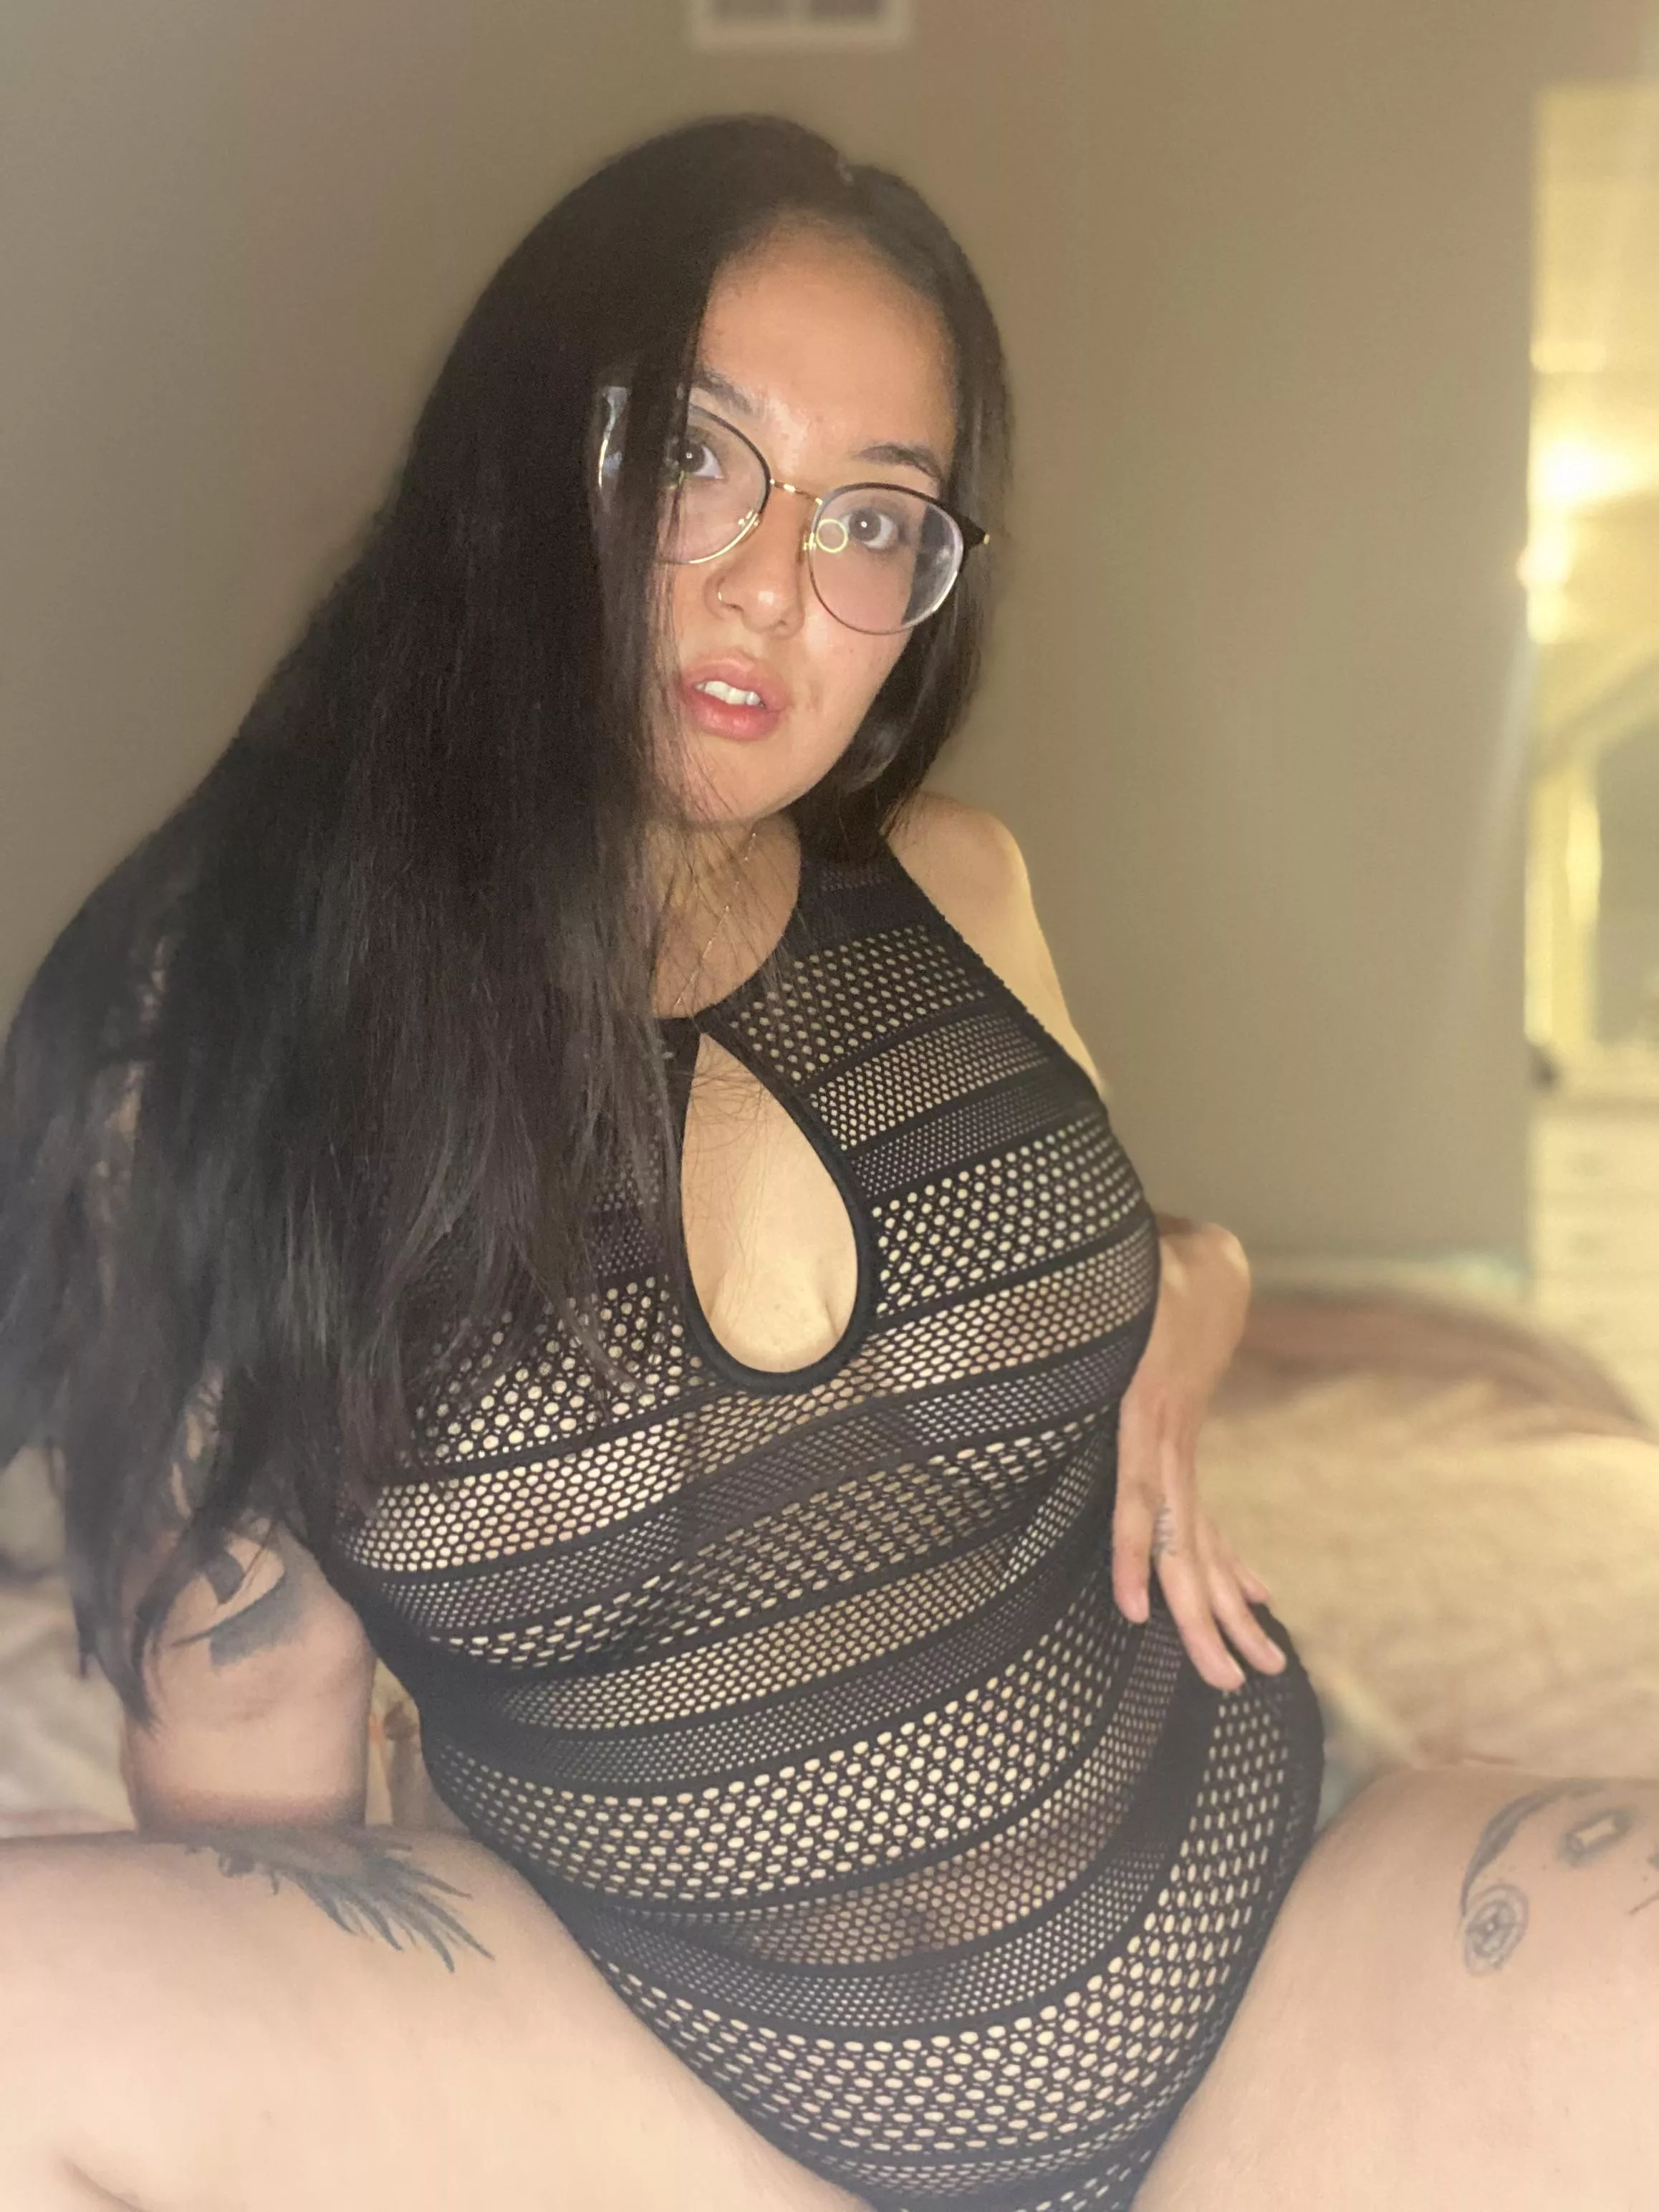 Chubby Nude Girls With Glasses